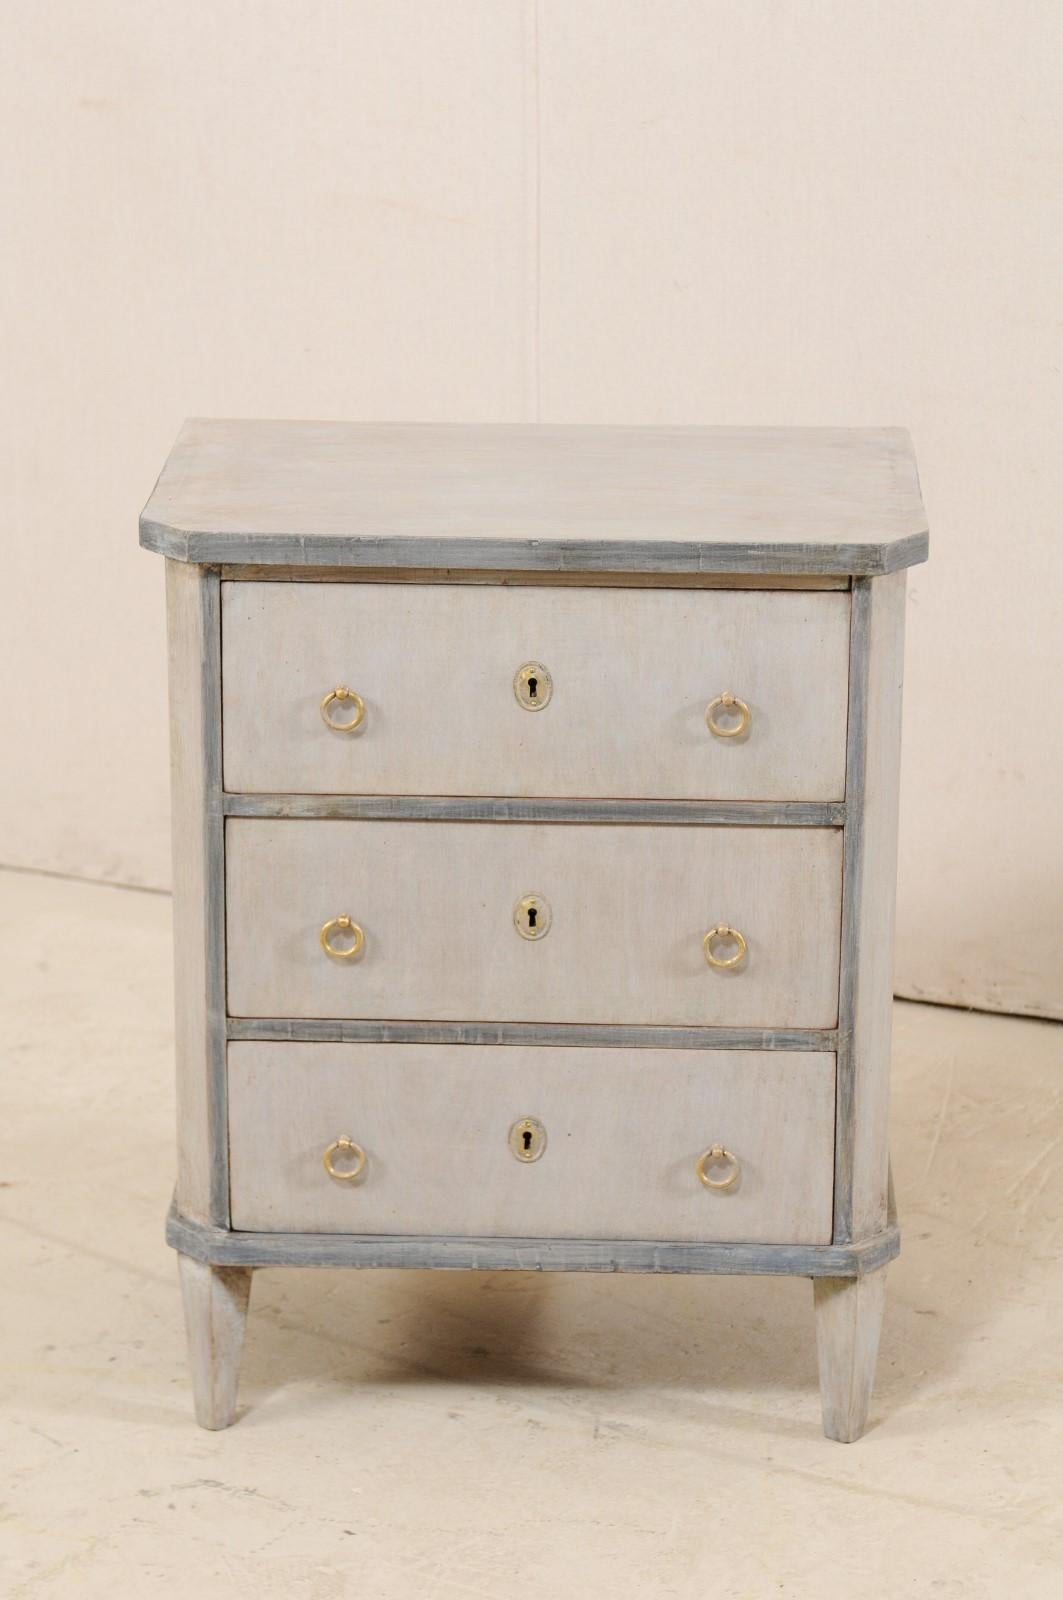 Hand-Painted Swedish Period Gustavian Petite Sized Three-Drawer Chest, Early 19th Century